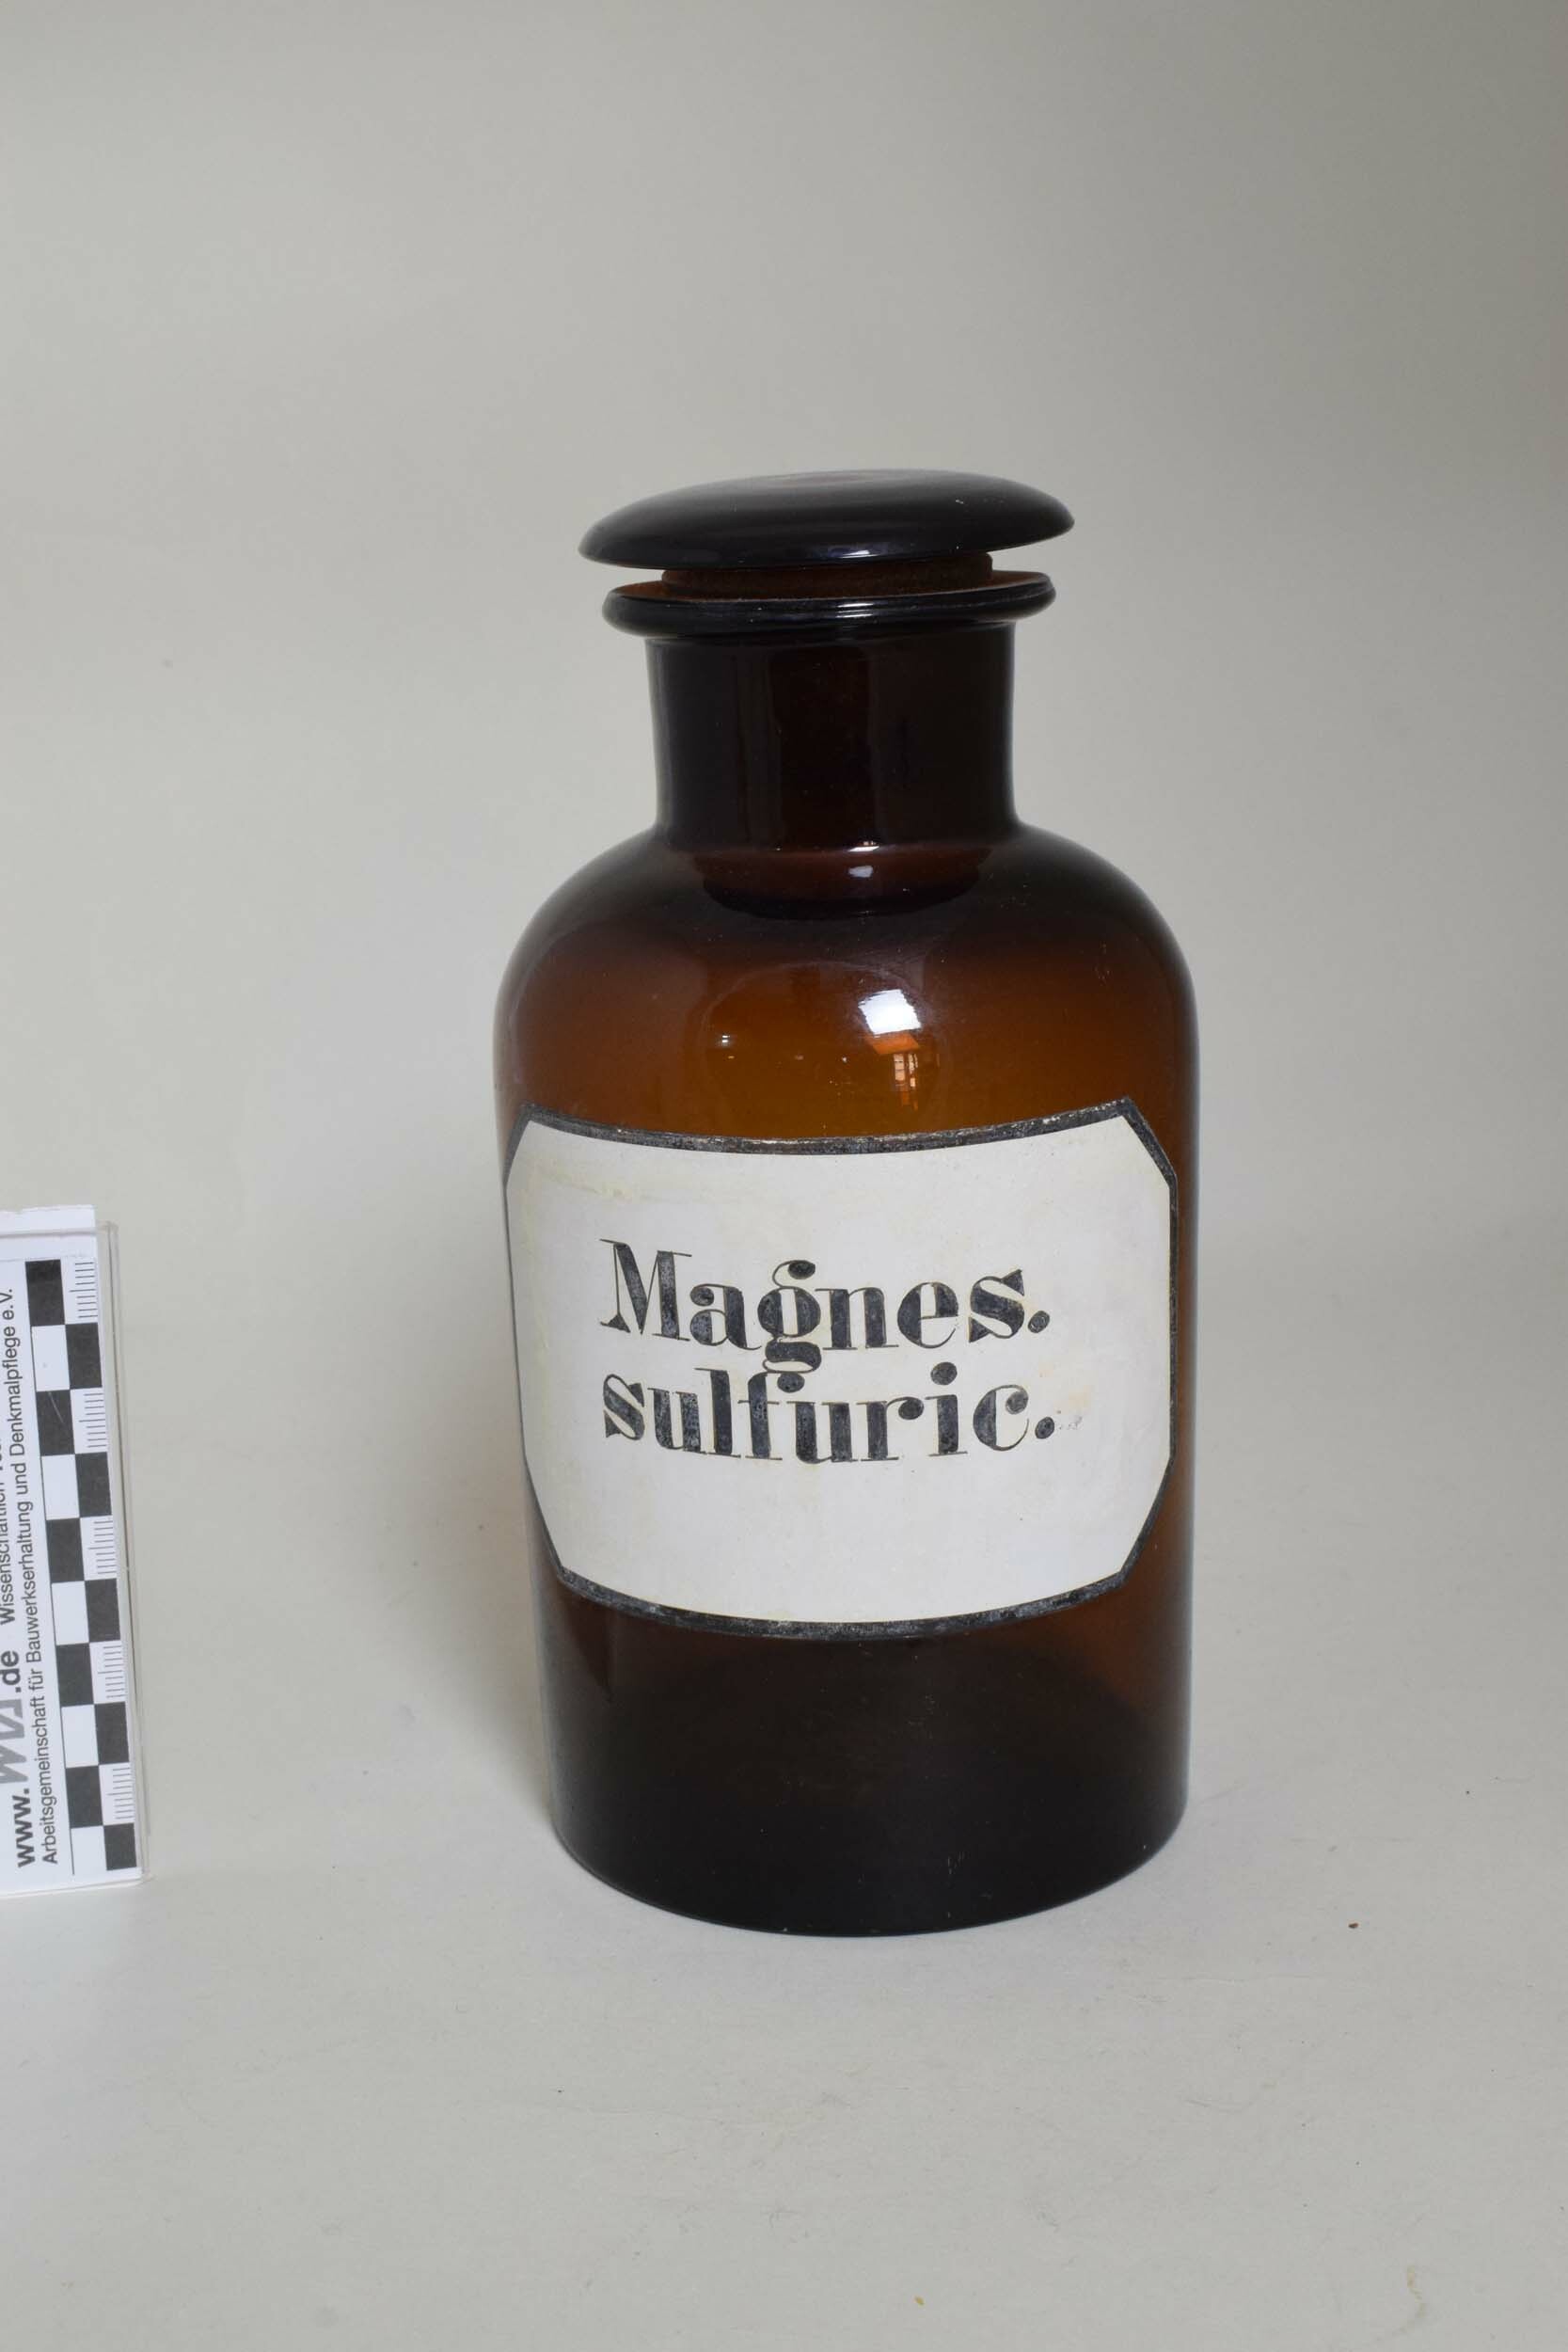 Apothekenflasche "Magnes Sulfuric." (Heimatmuseum Dohna CC BY-NC-SA)